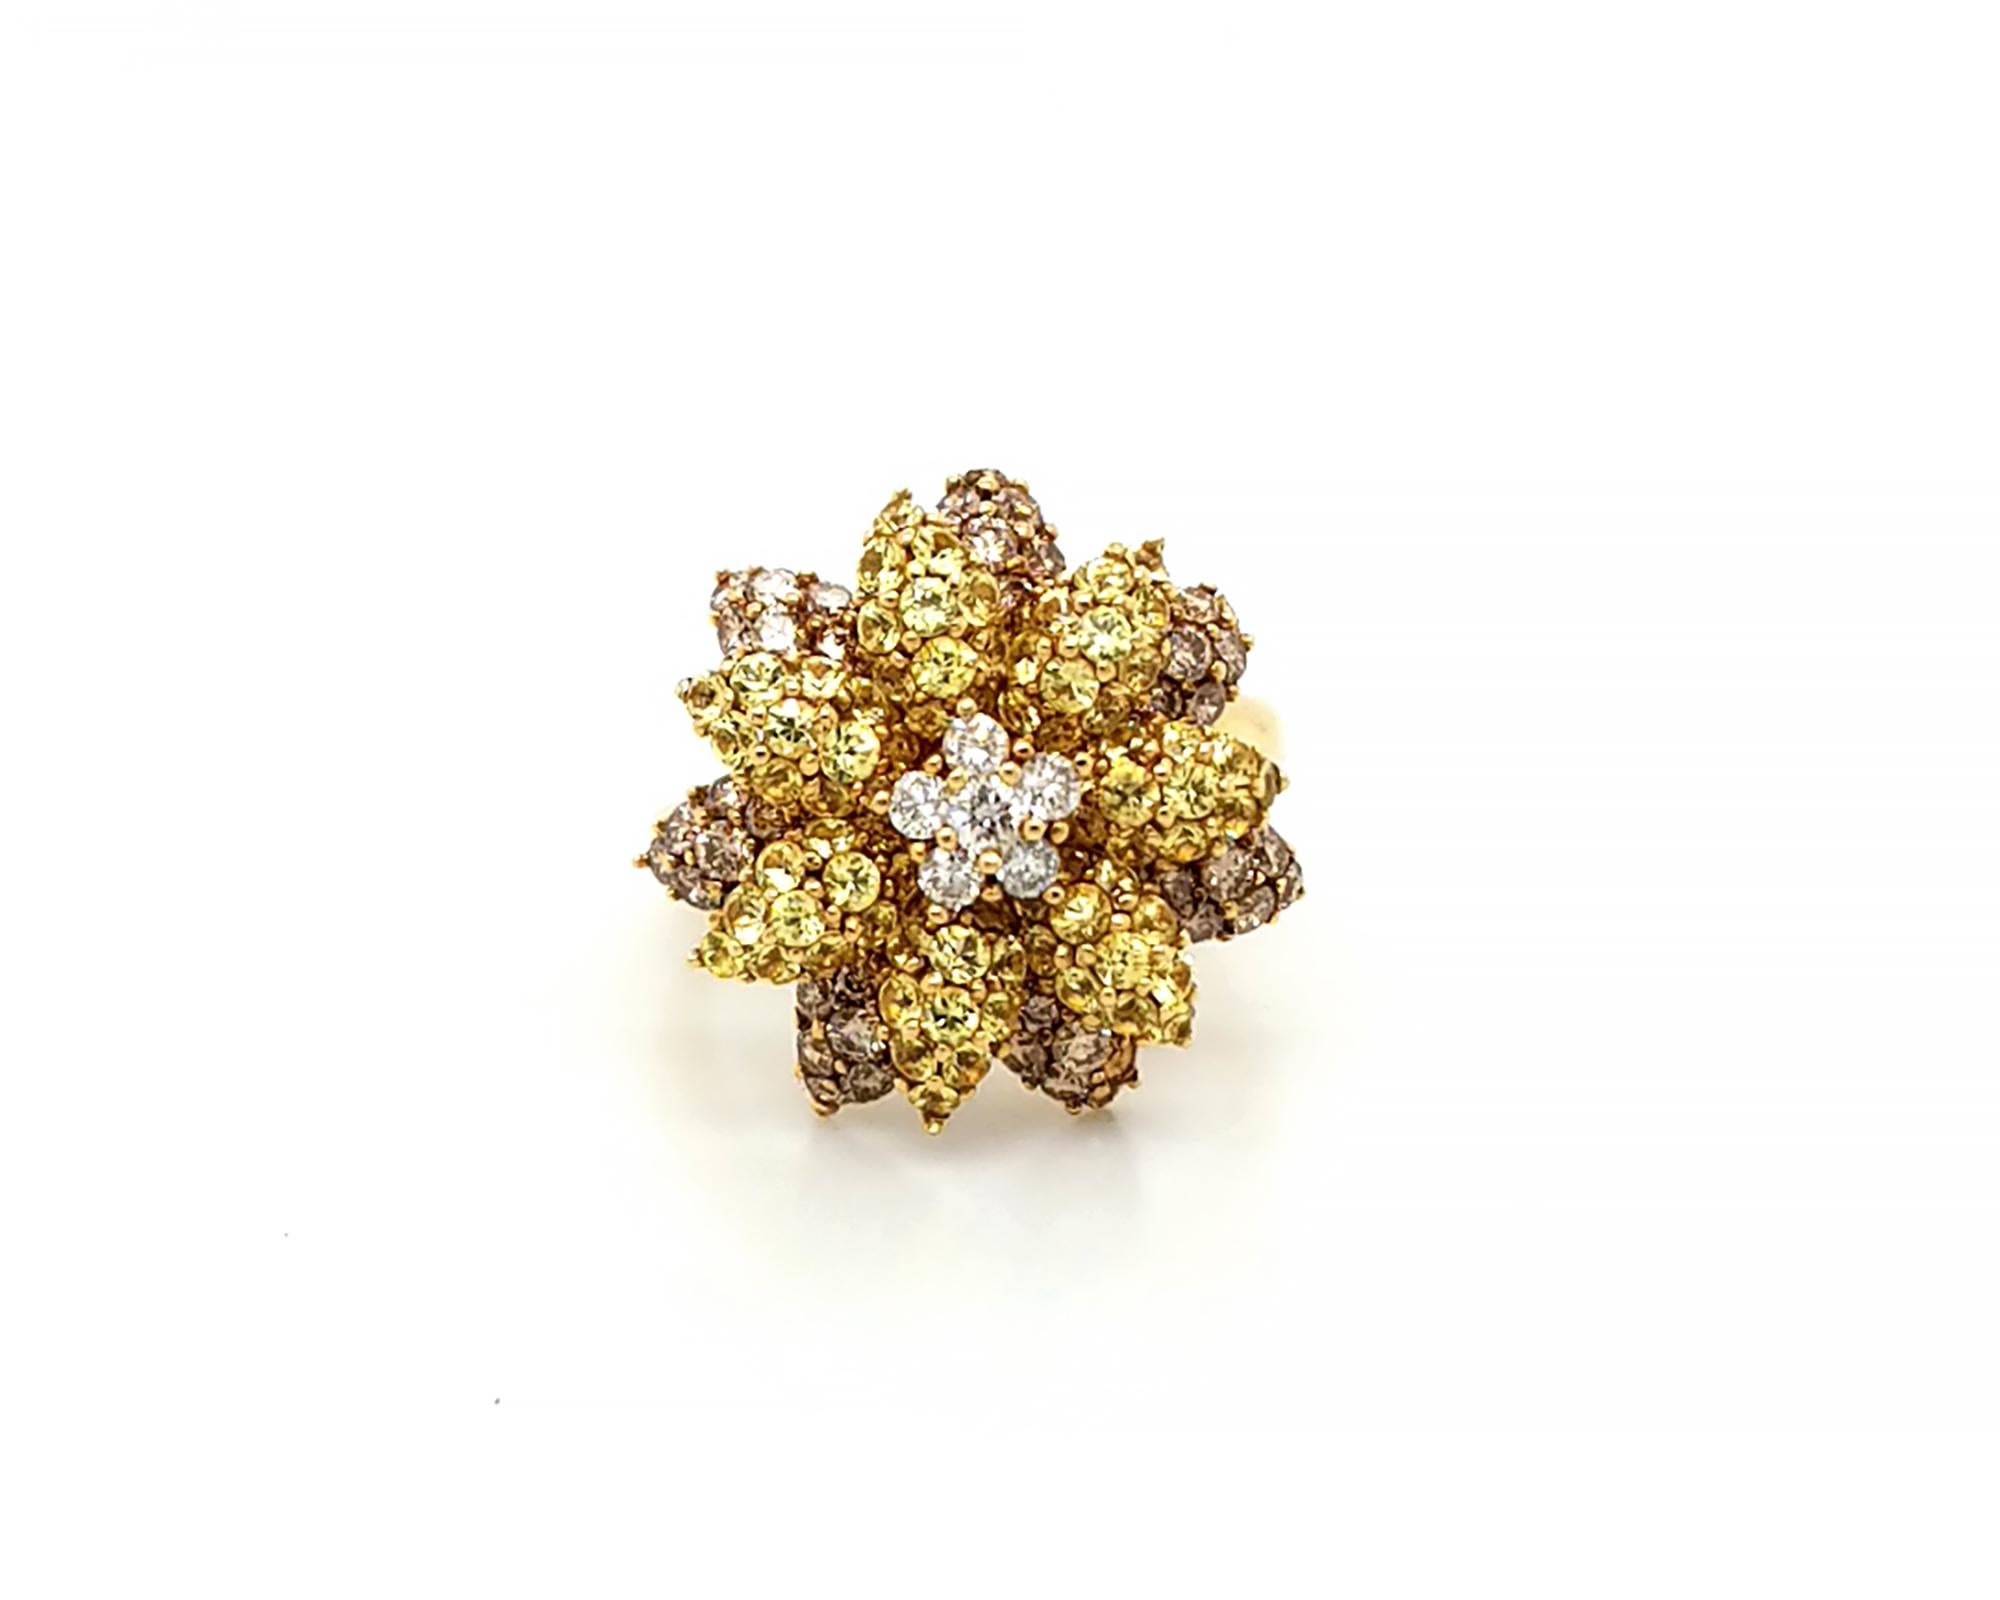 Beautiful multi-colored diamond flower ring suitable for any occasion. Set with yellow and white diamonds.
Estimated clarity of the diamonds is VS.
The diamonds are not certified.
The metal is 14K yellow gold.
Size: 6,5. Resizing available. 




